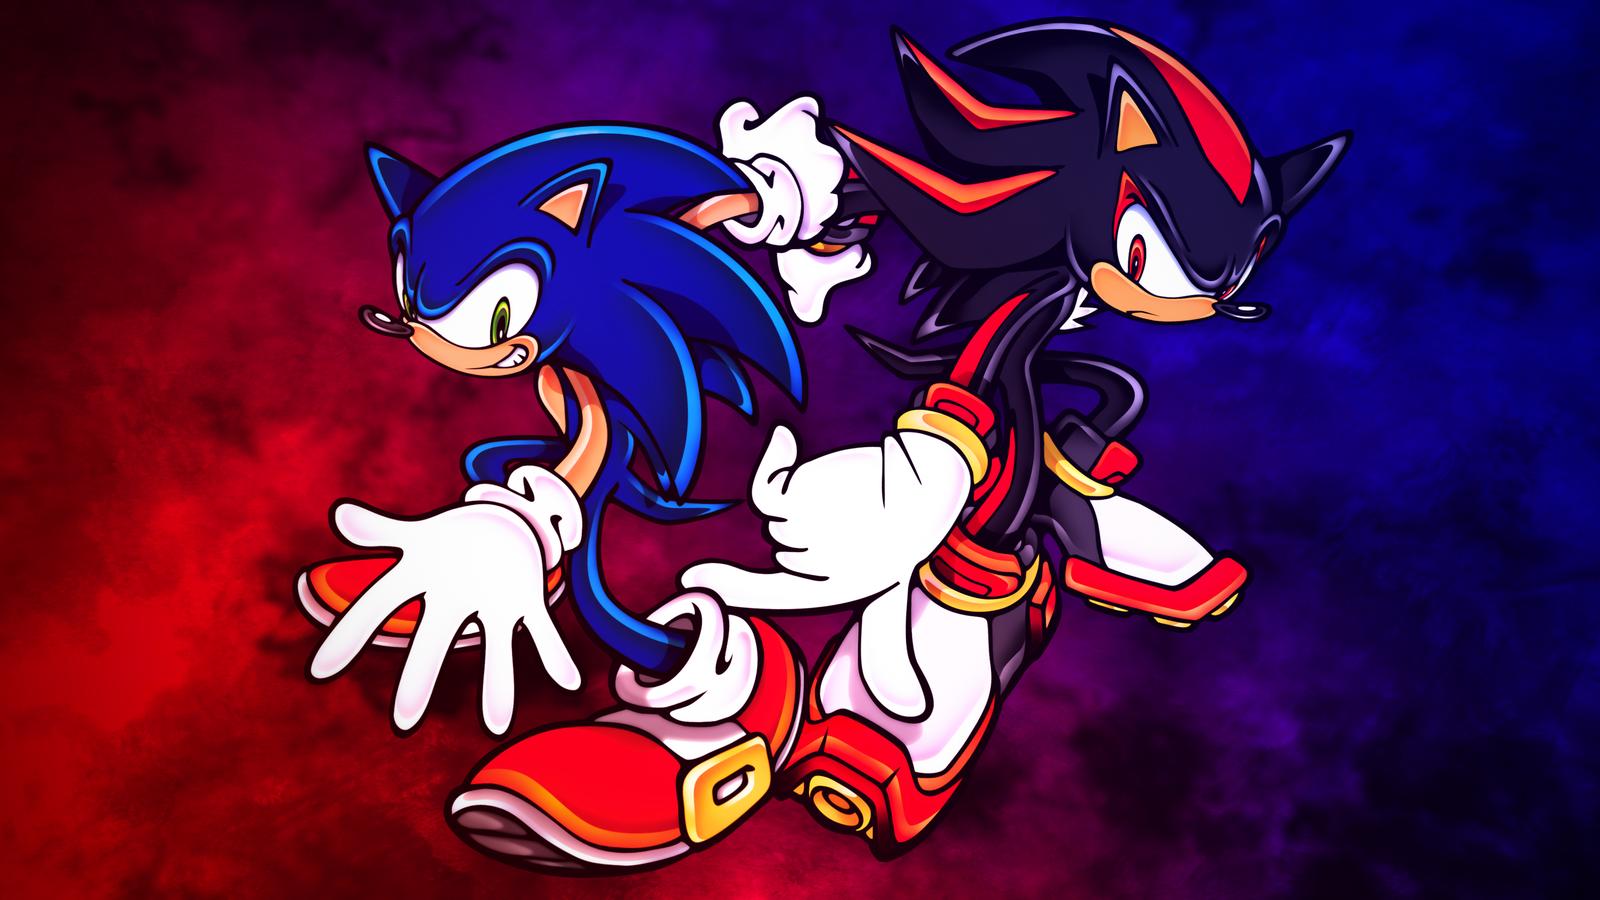 Shadow the Hedgehog In Red Background HD Sonic Wallpapers  HD Wallpapers   ID 48466